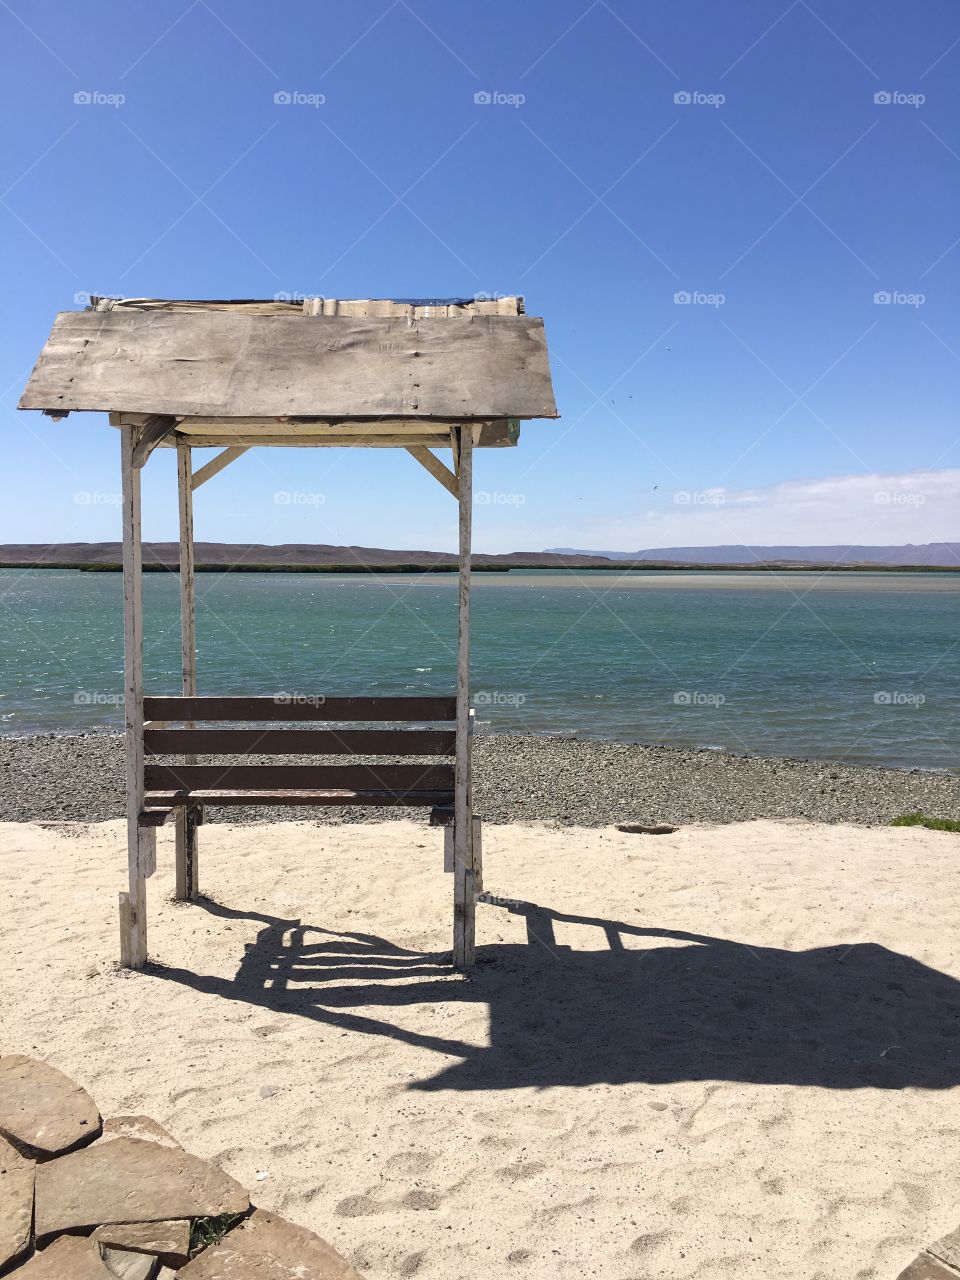 A quiet bench overlooks the ocean in a clear blue sky day